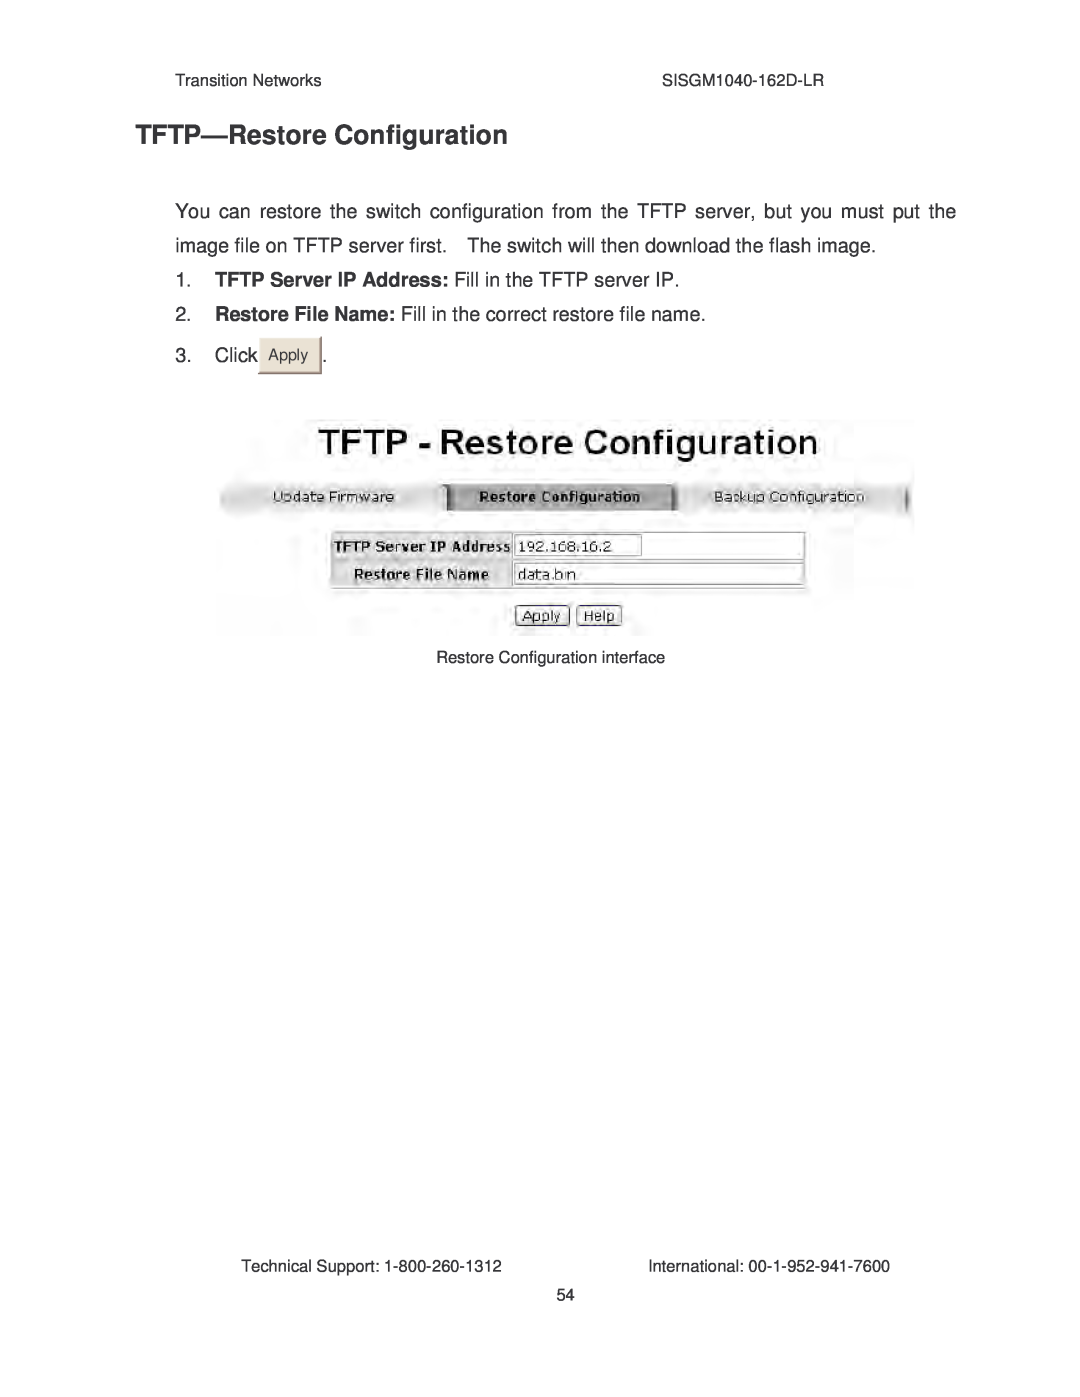 Transition Networks SISGM1040-162D manual TFTP-Restore Configuration 